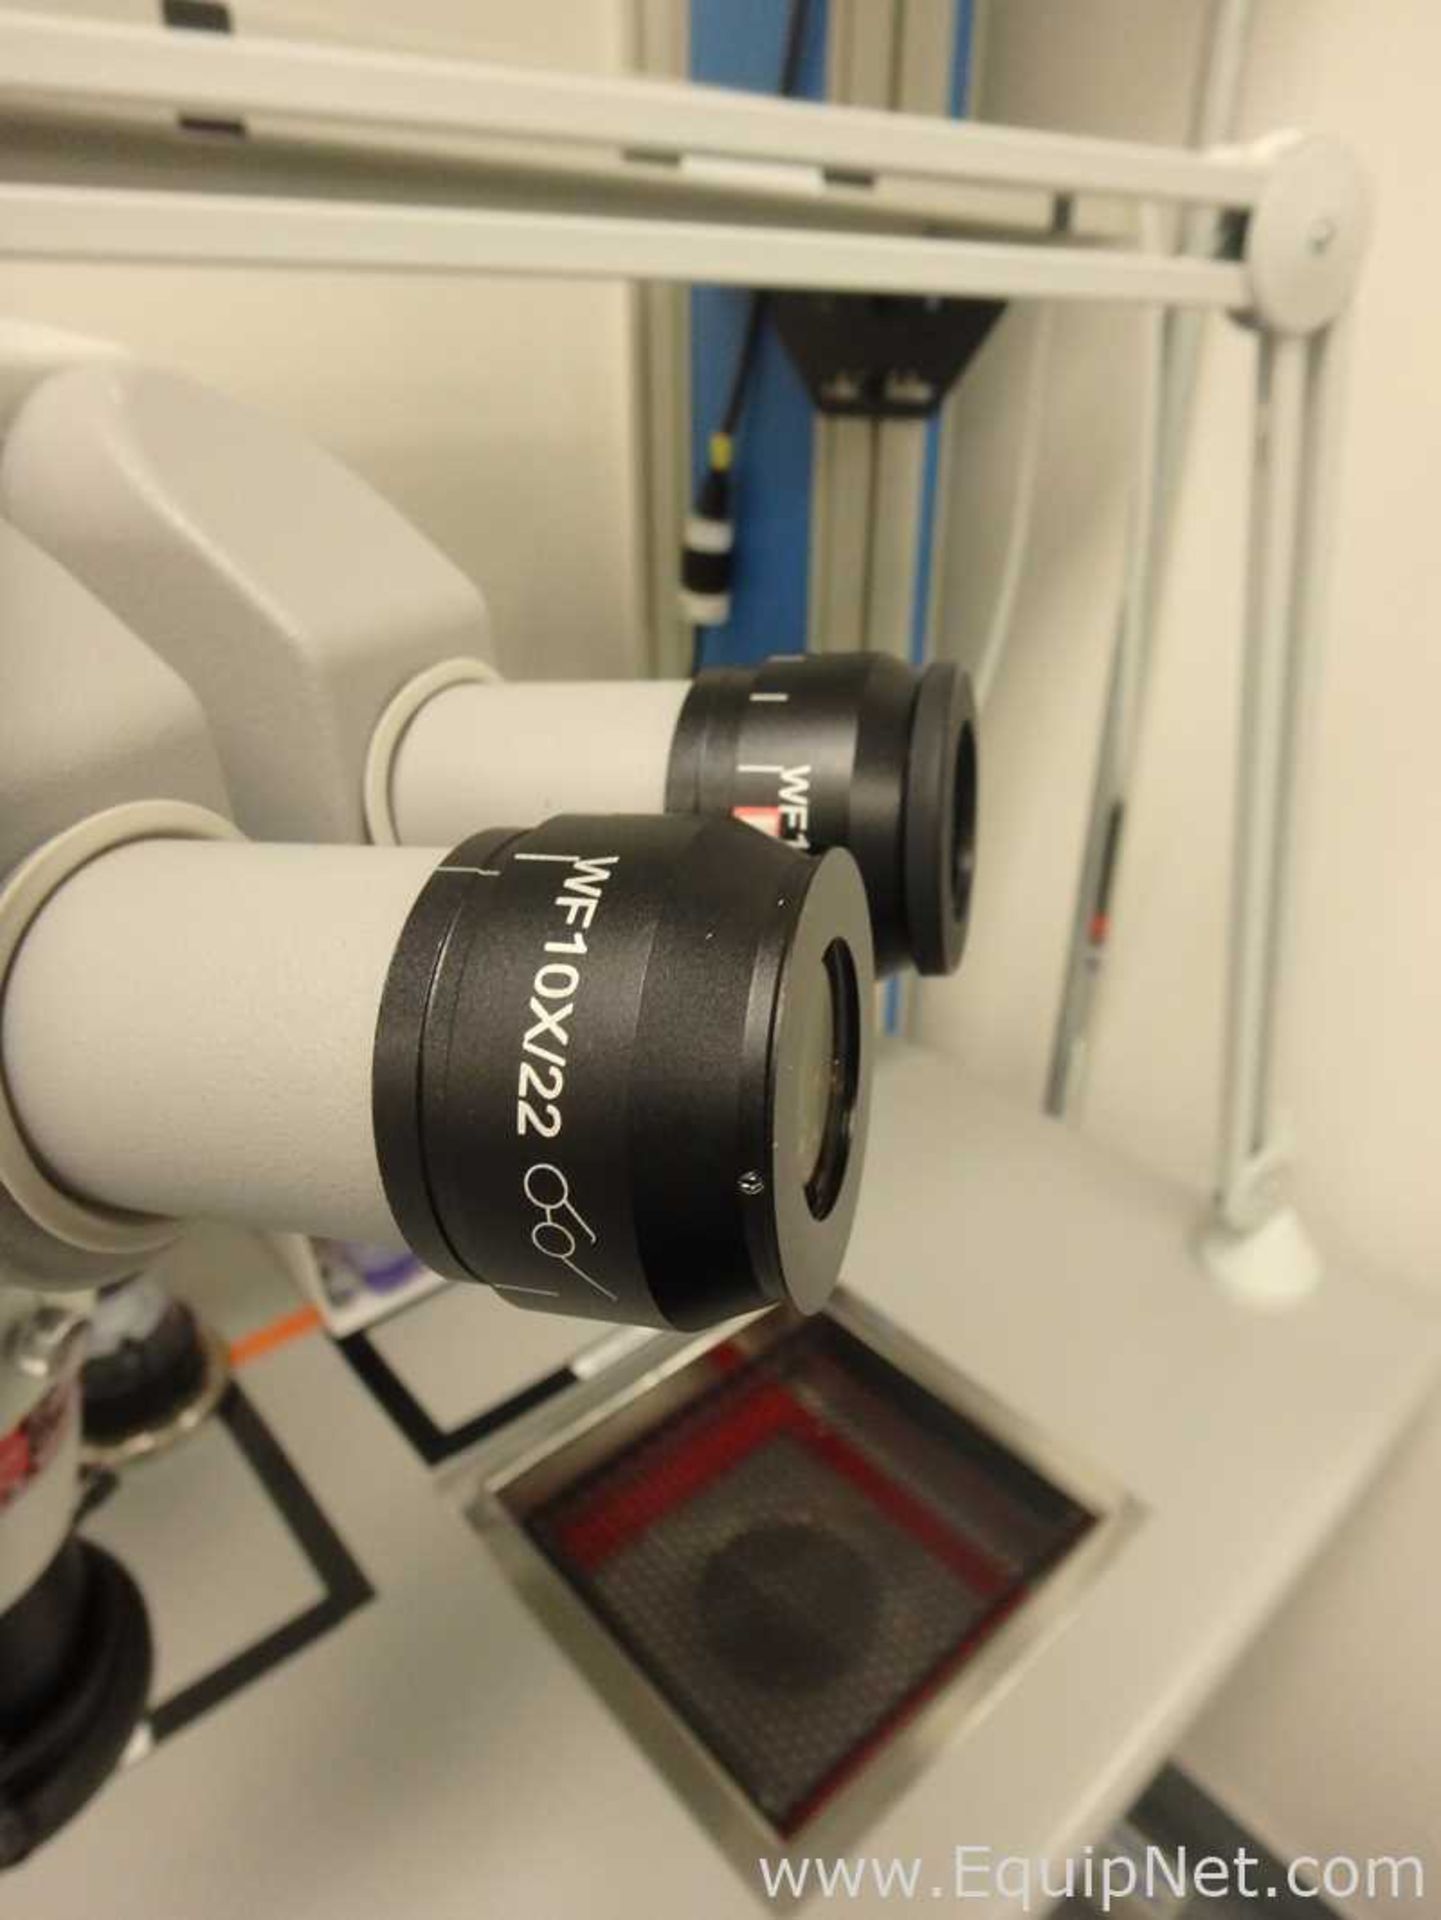 Boom Mounted Stereo Microscope - Image 6 of 10